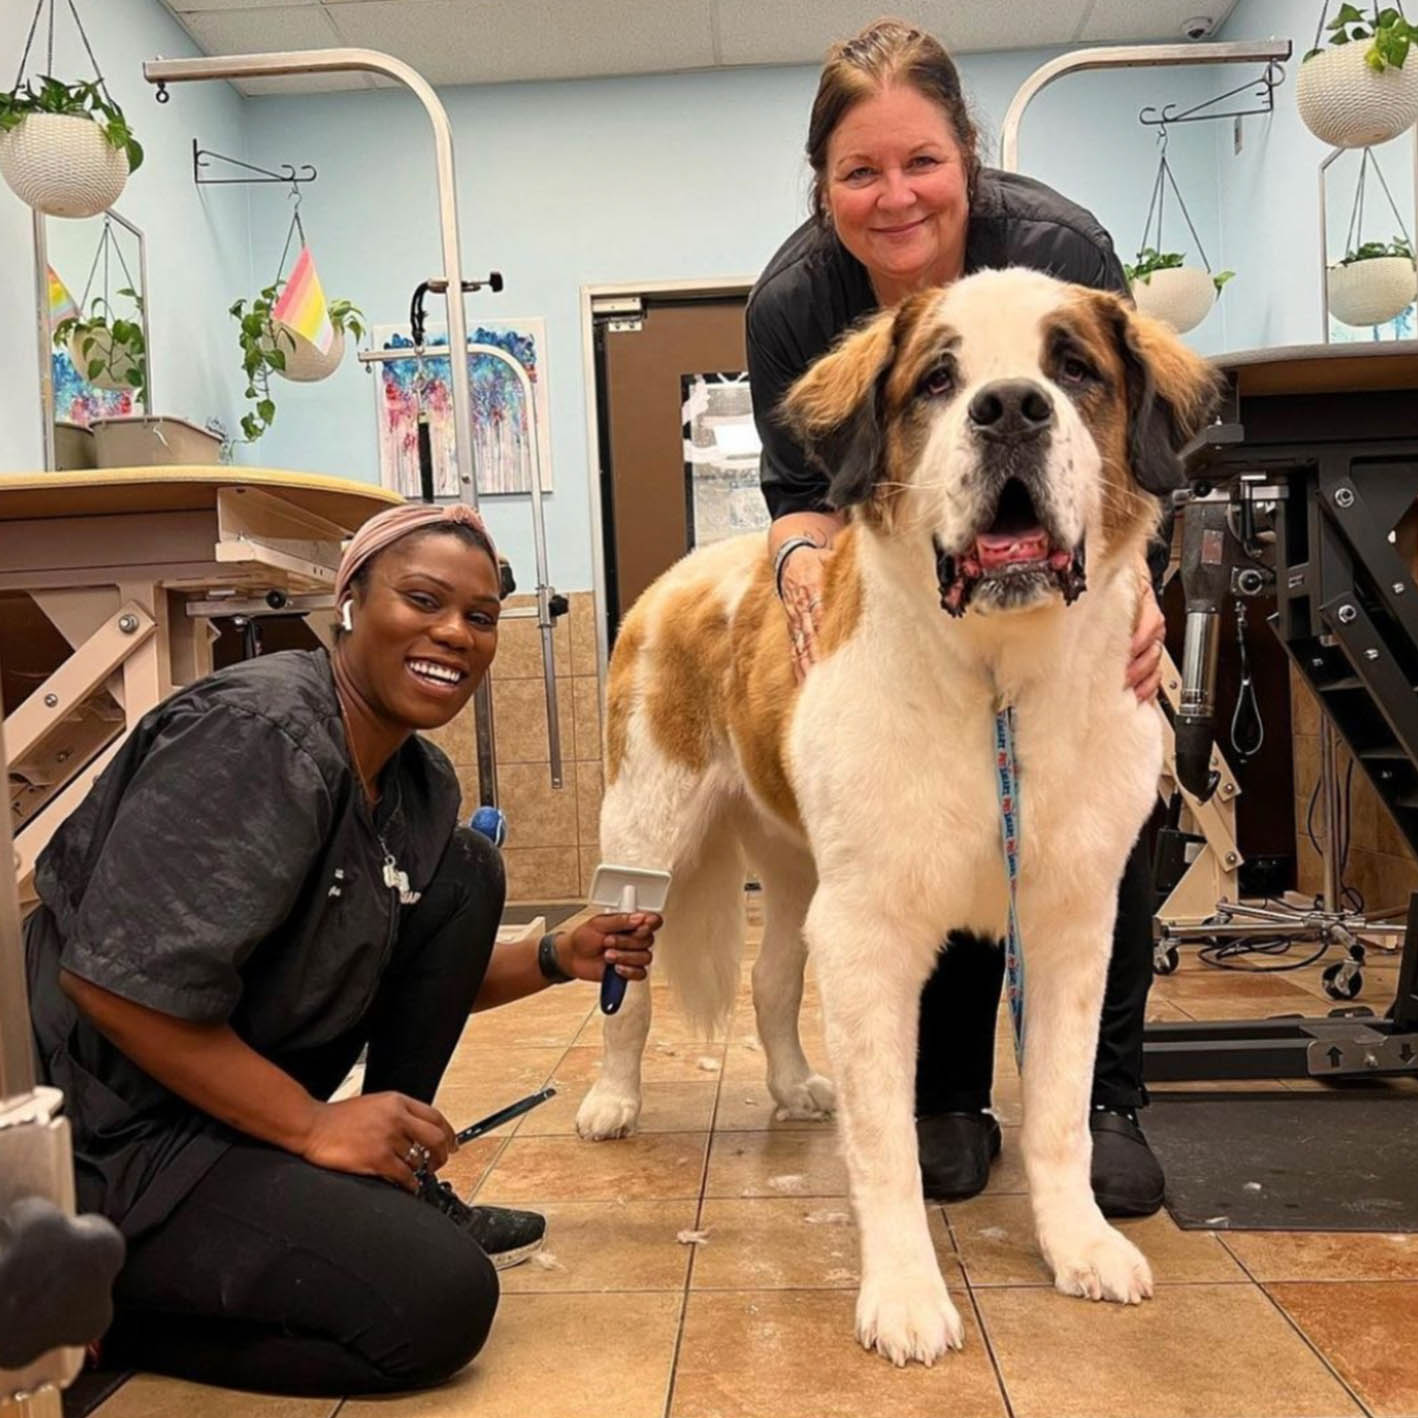 Two groomers with large dog